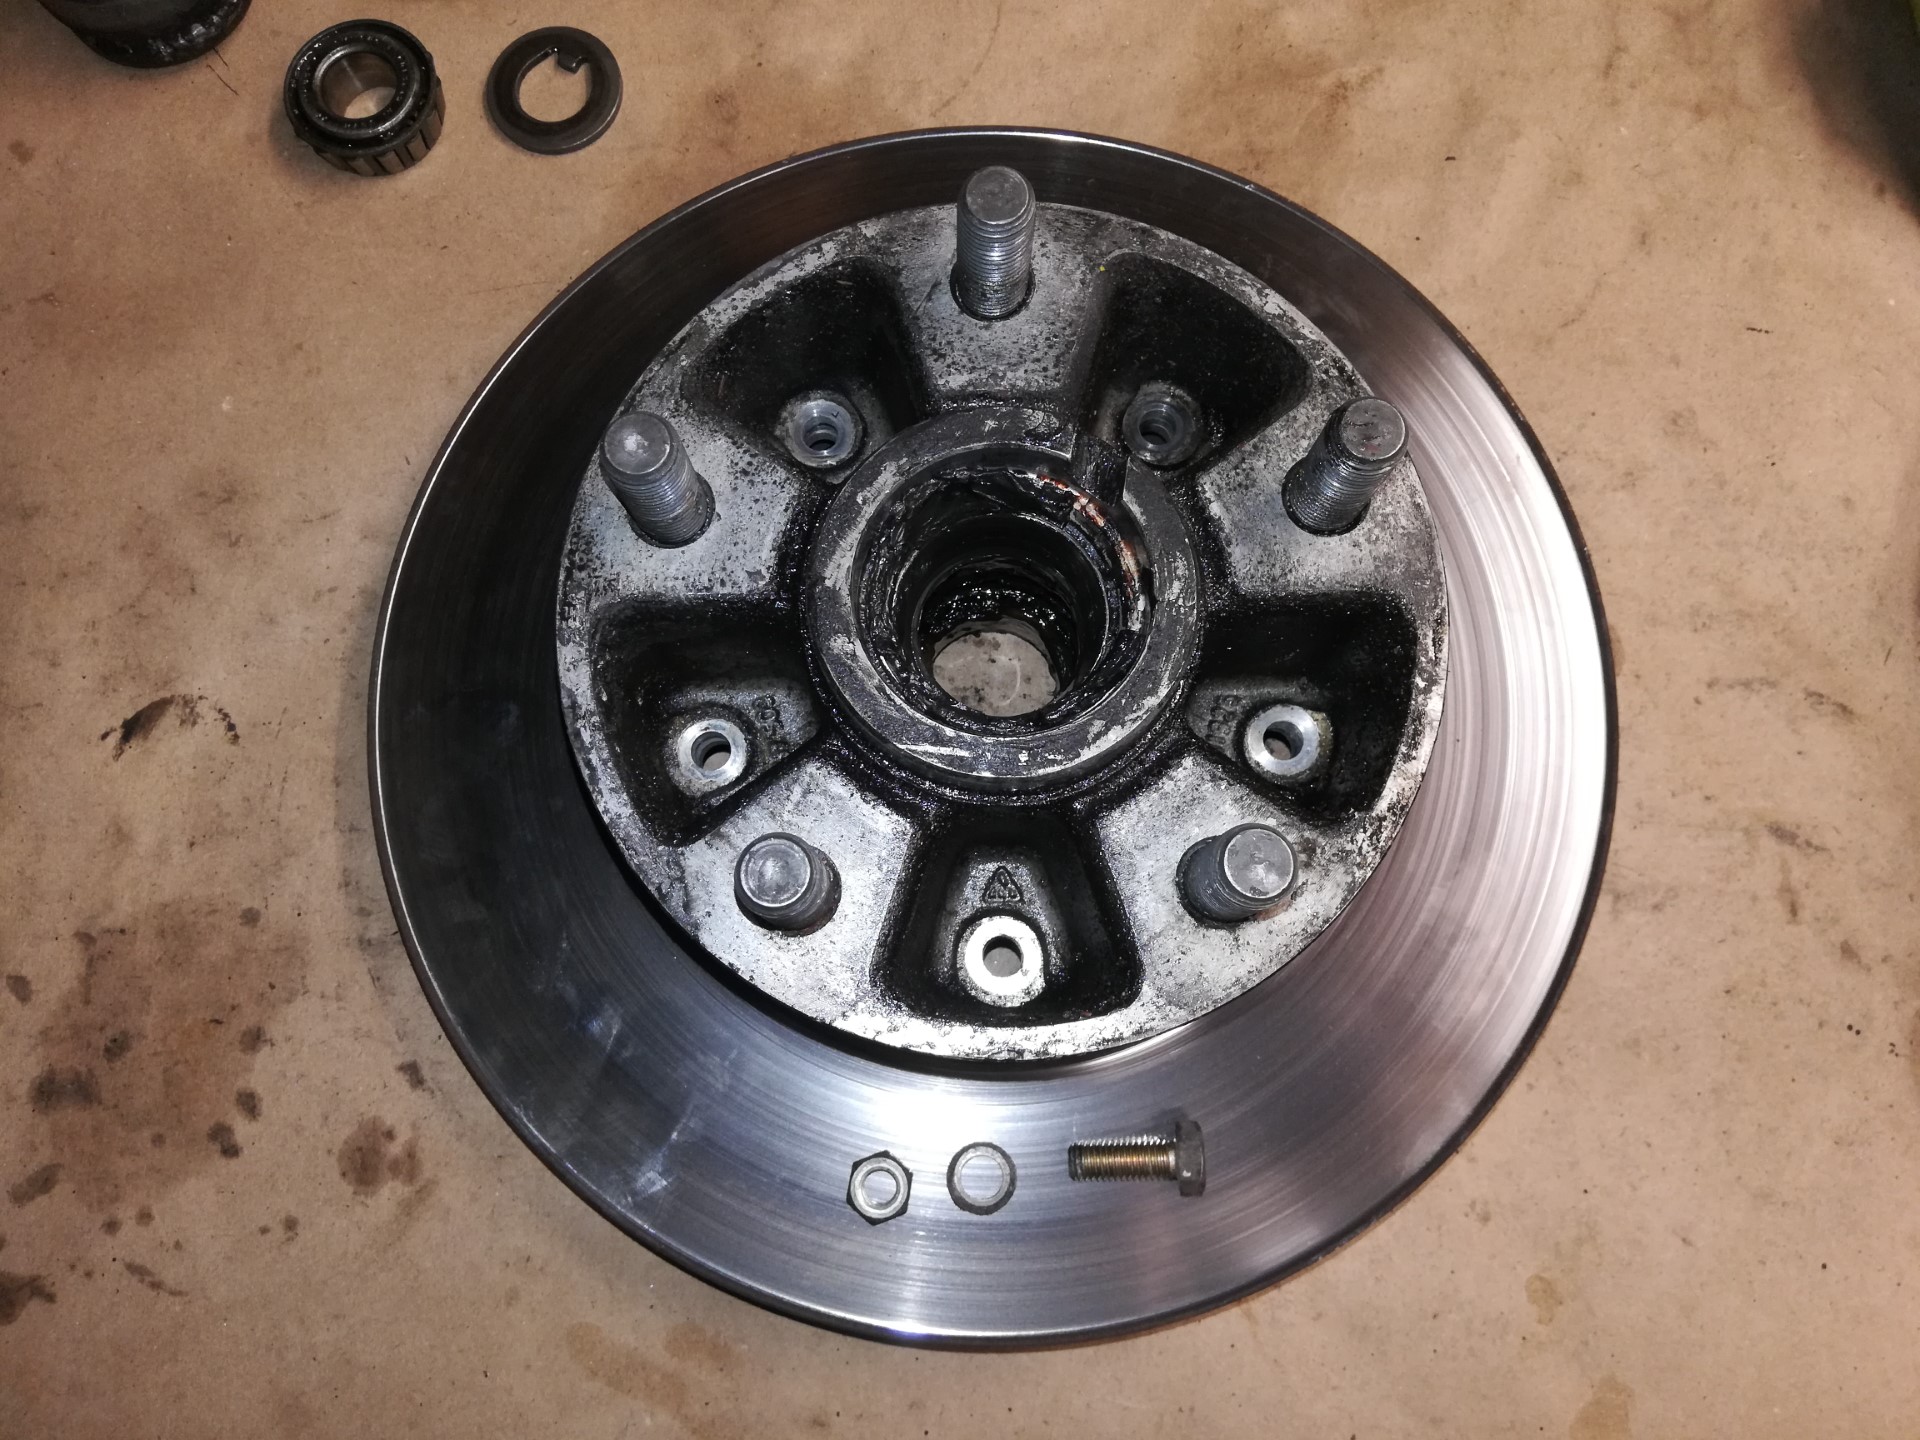 Air-cooled Porsche 911 front brake rotor removal